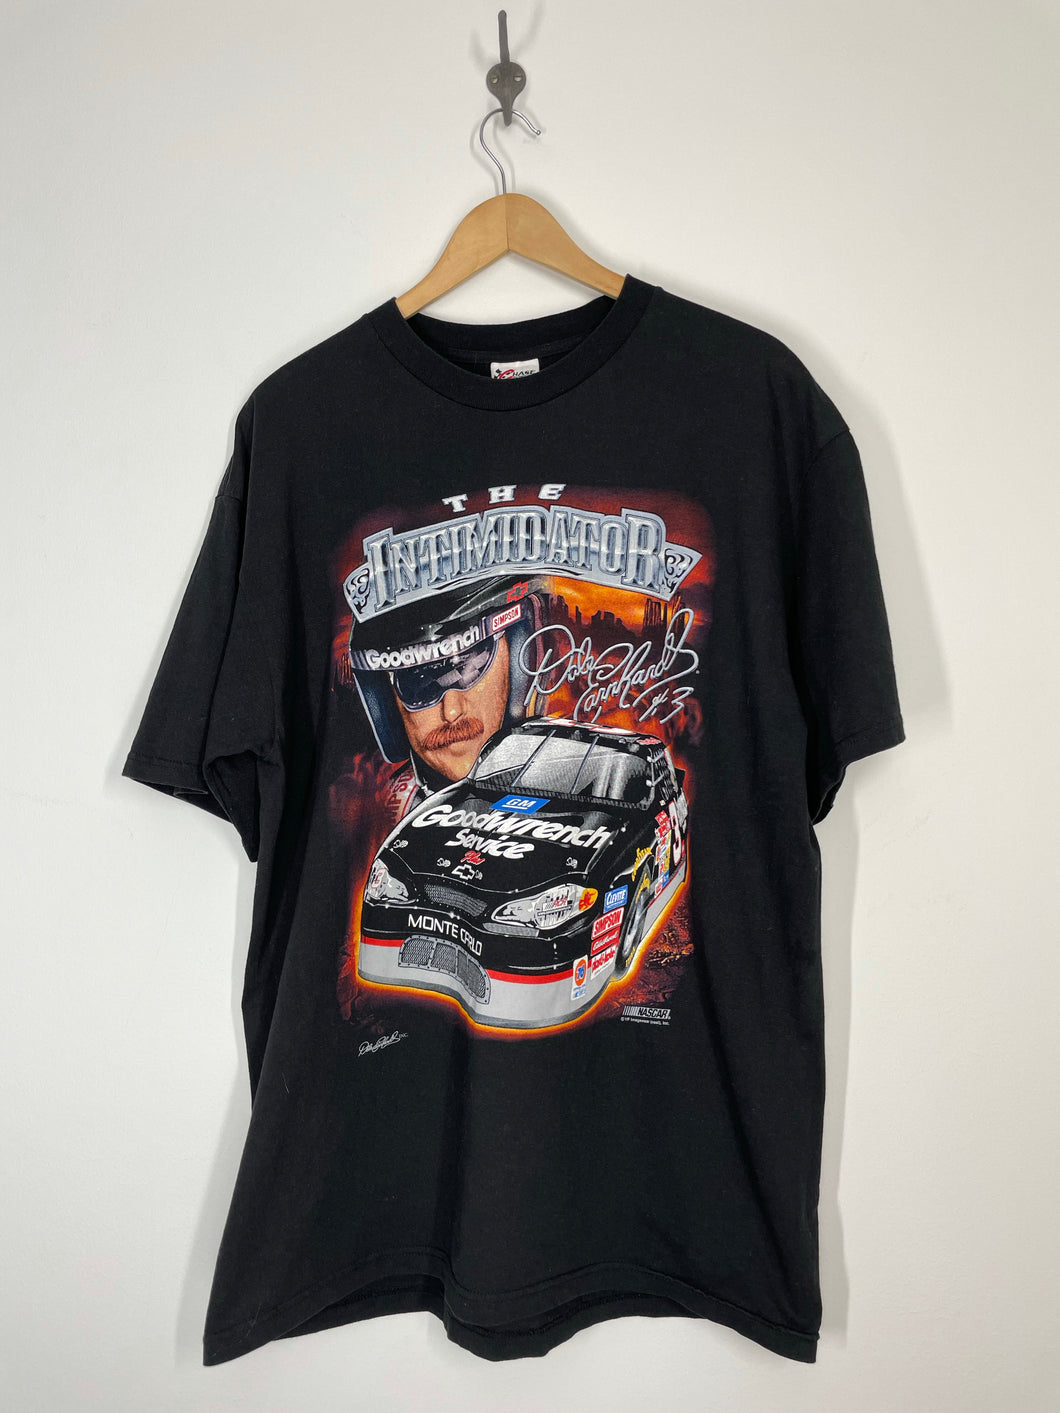 NASCAR Dale Earnhardt #3 The Intimidator T Shirt - Chase - XL